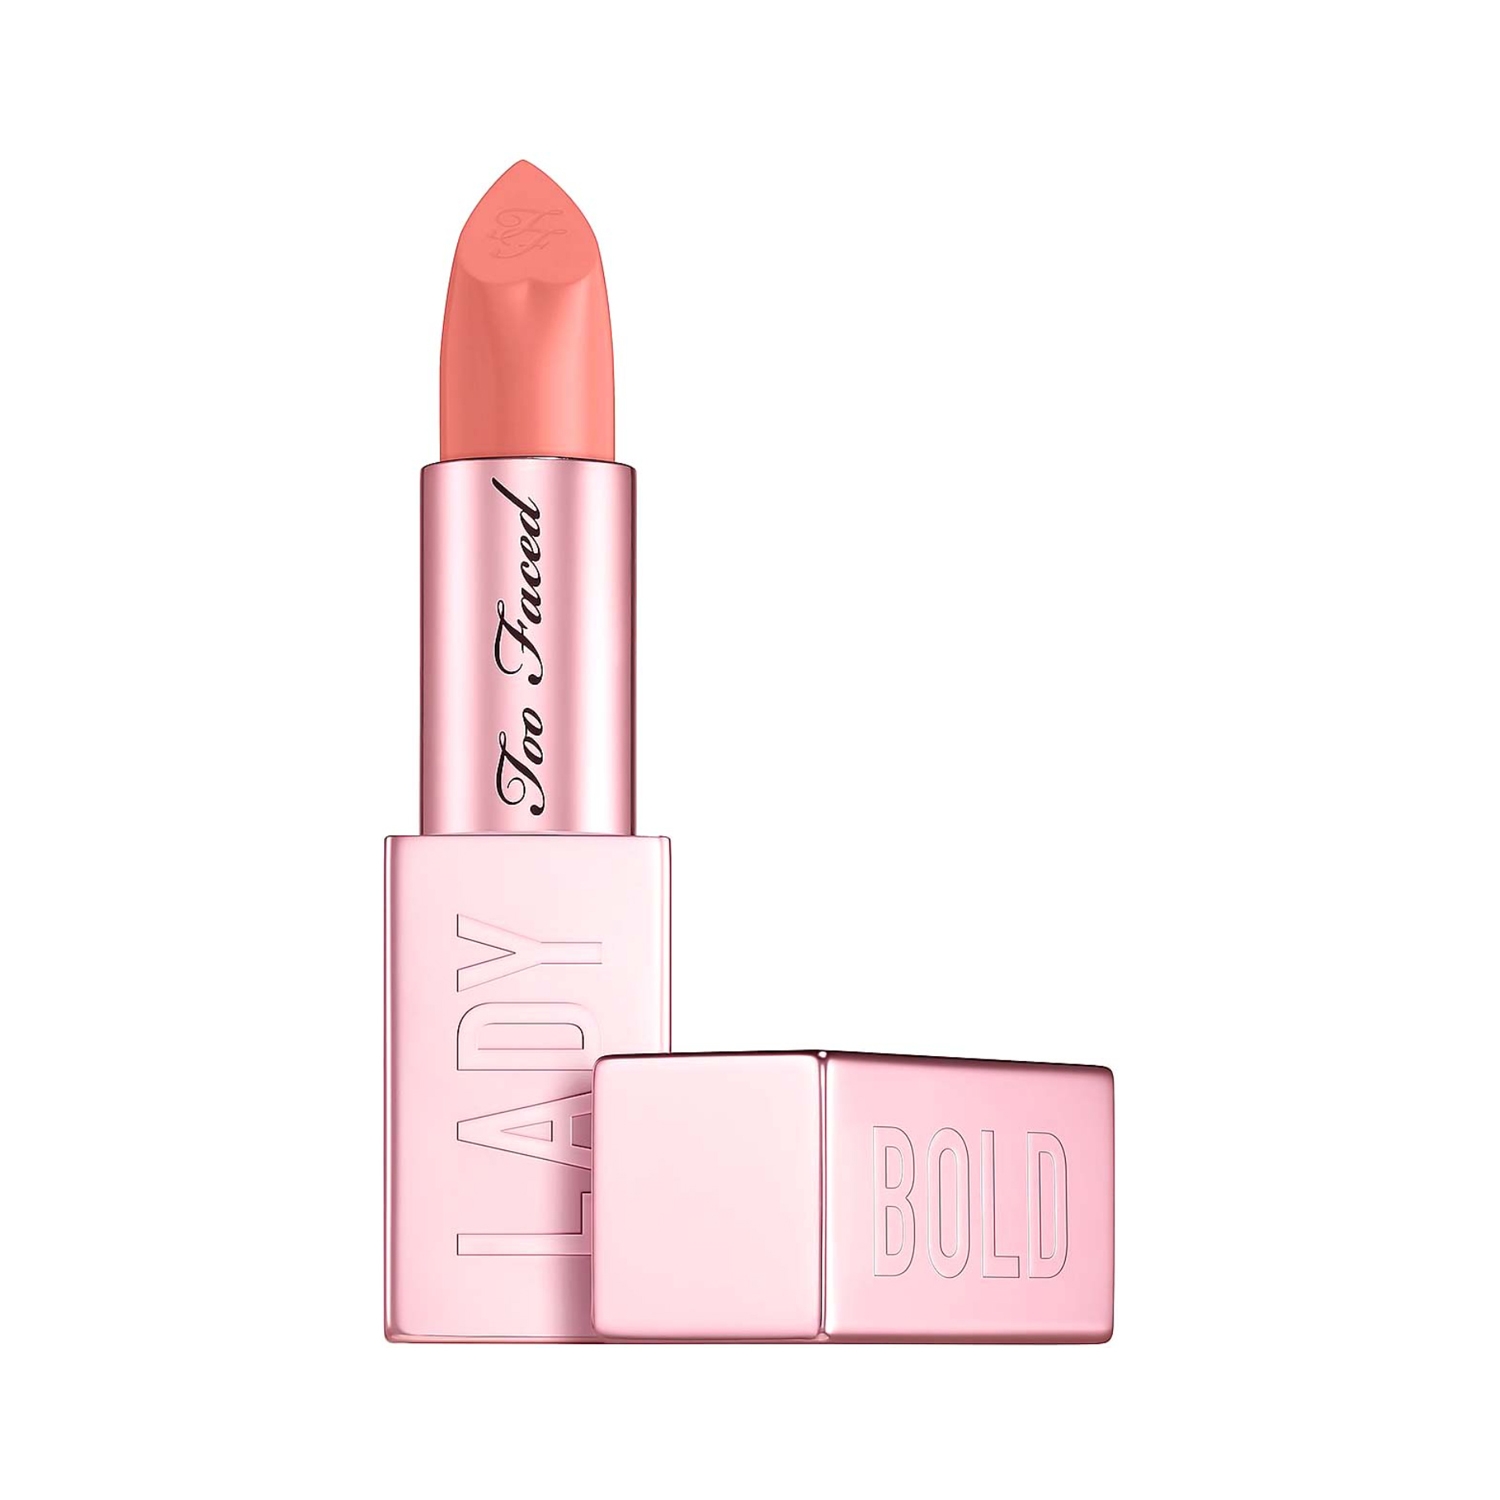 Too Faced | Too Faced Lady Bold Cream Lipstick - I'm Thriving (4g)